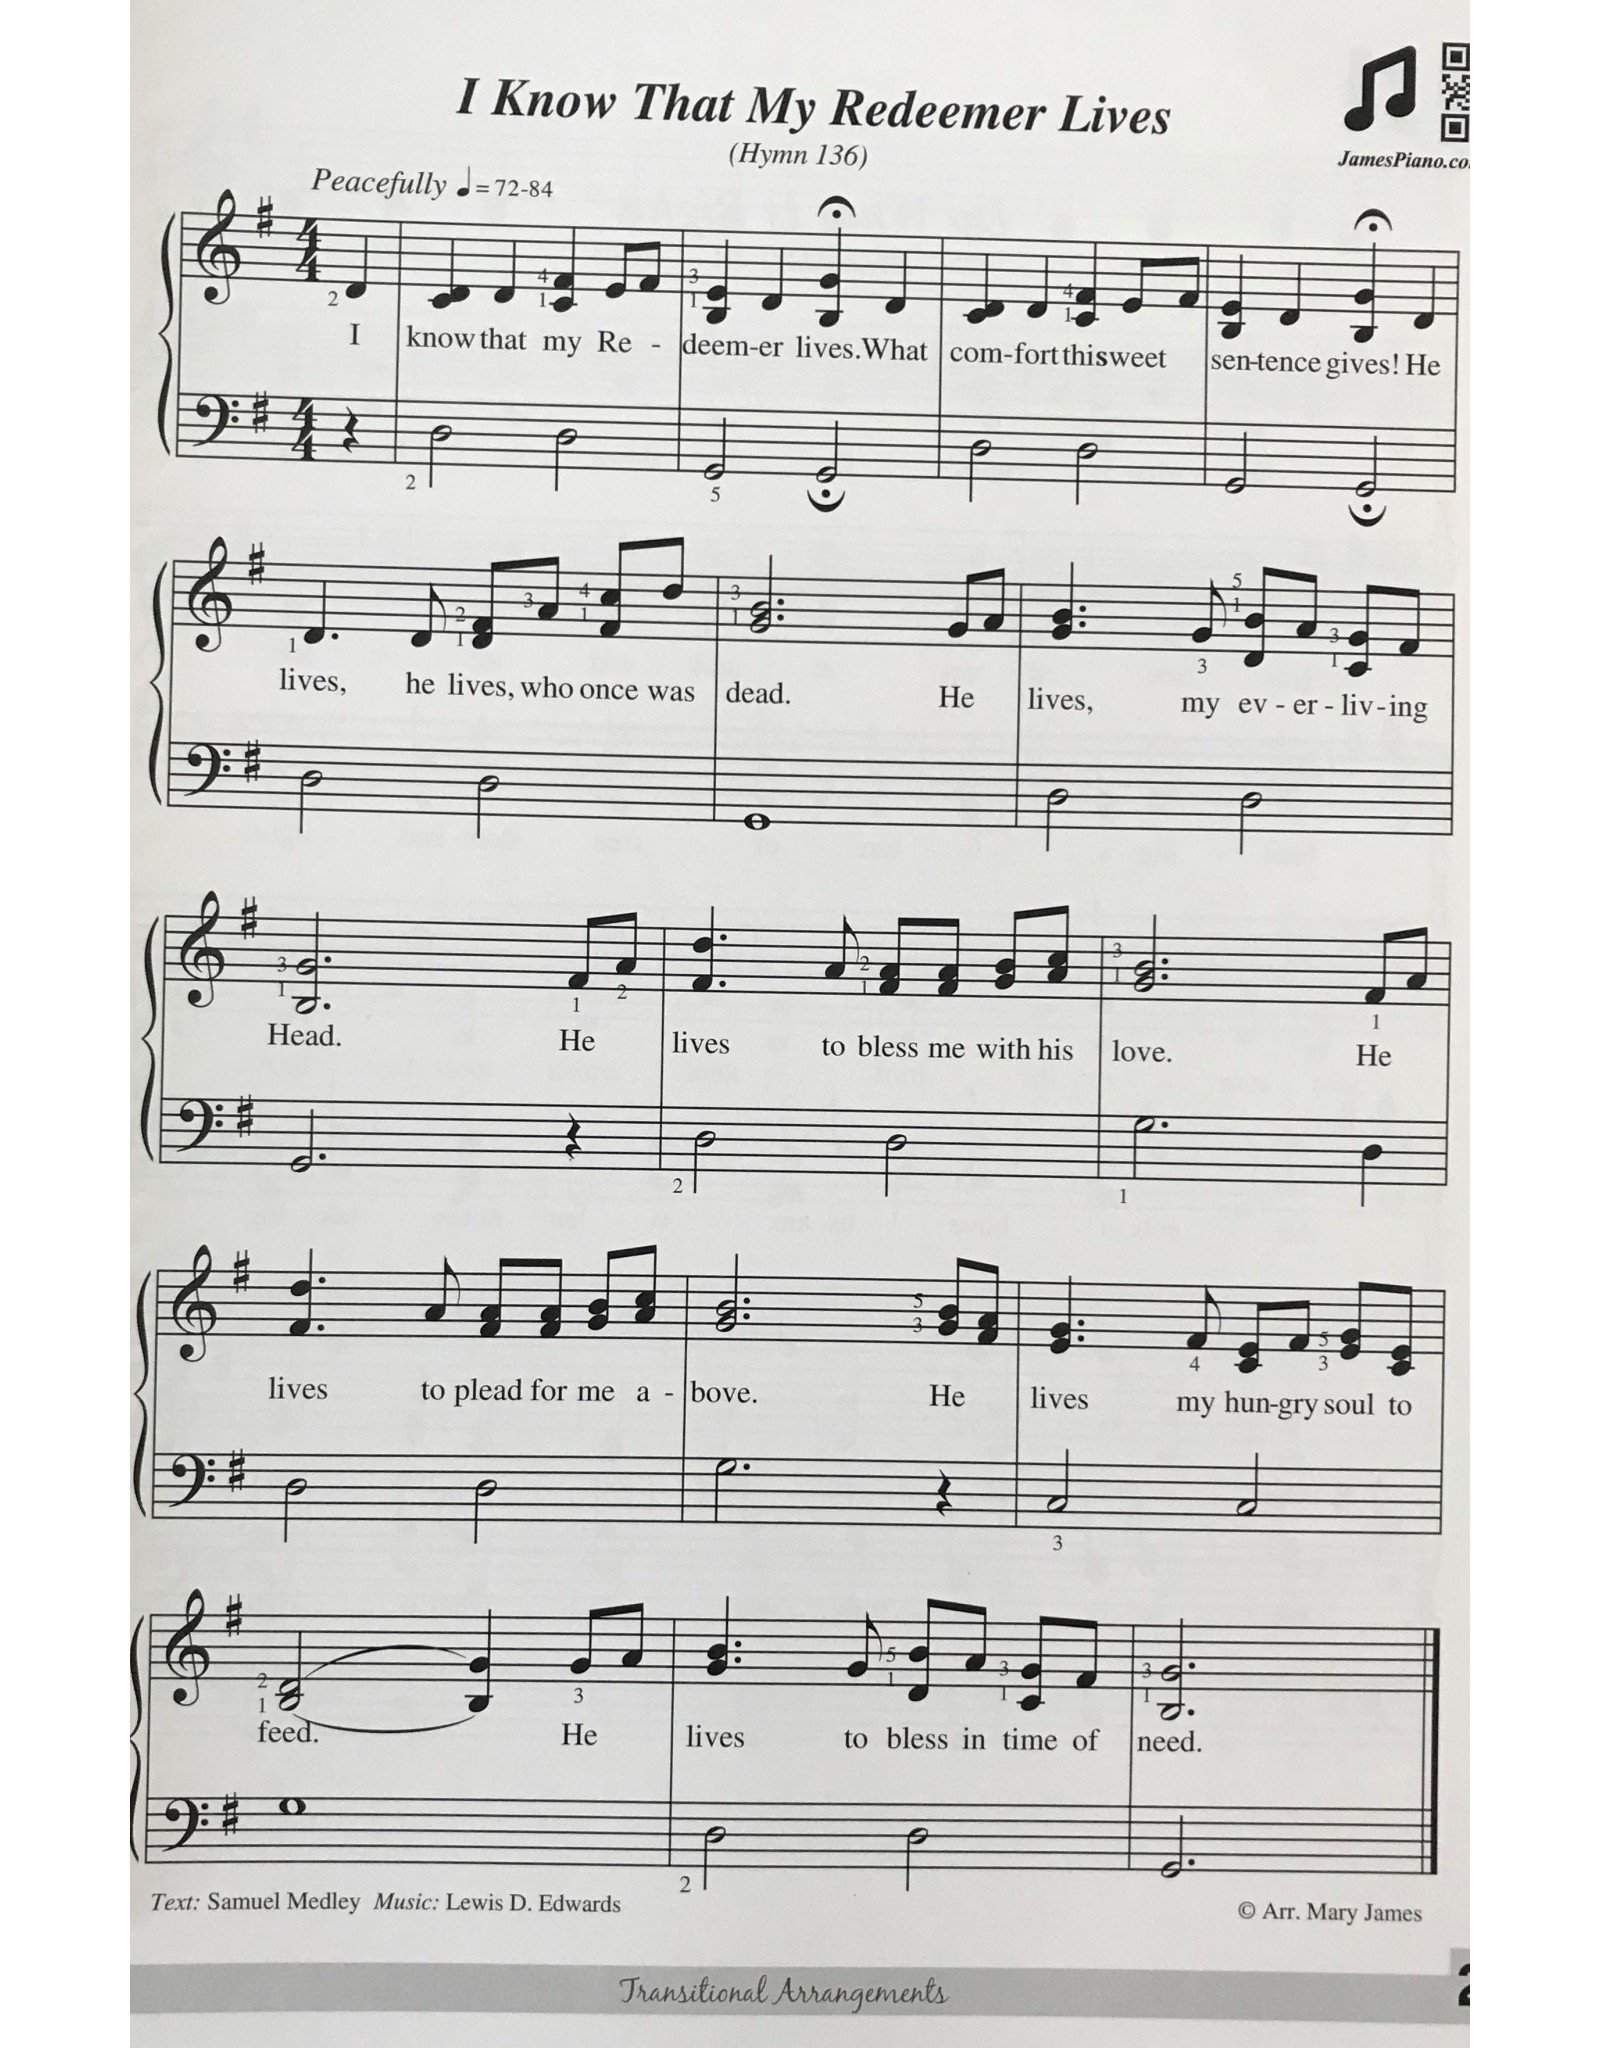 Misc. Supplier Hymns: Transitional Arrangements by Mary James